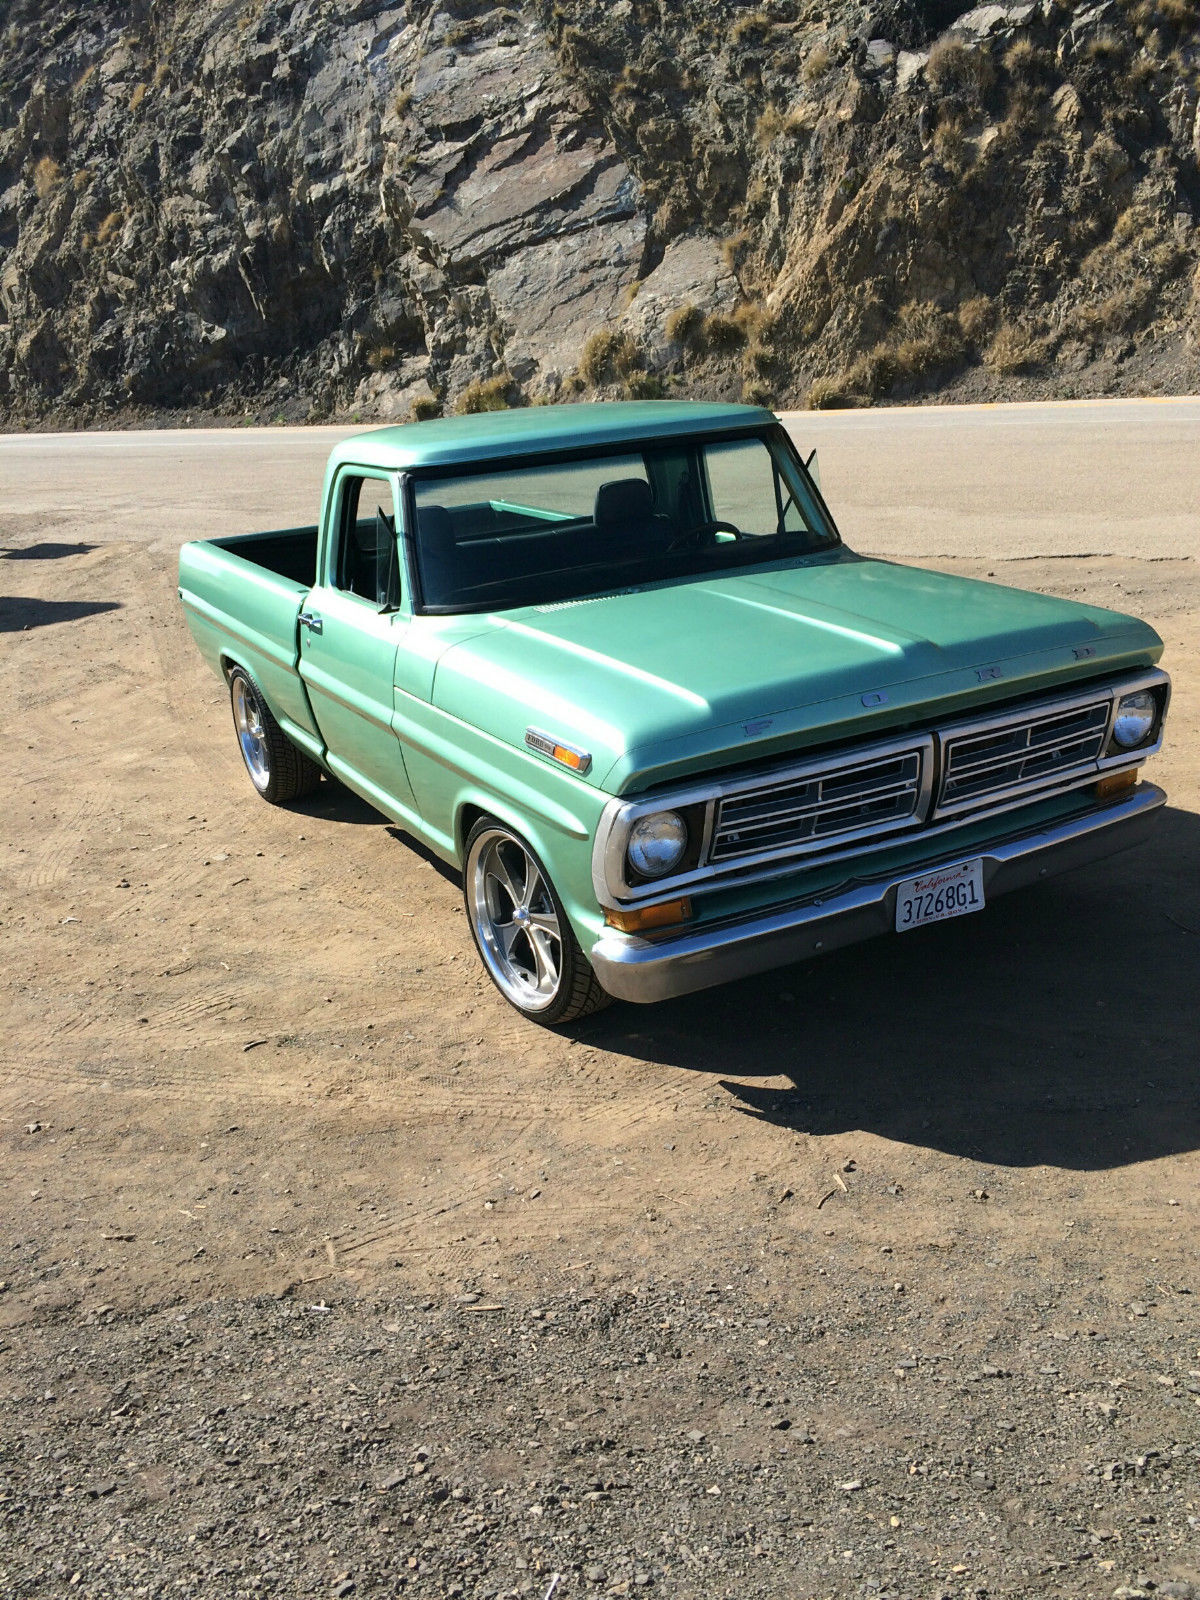 Auction Watch: 1972 Ford F-100 Short Bed Fuel Injected V8 - DailyTurismo